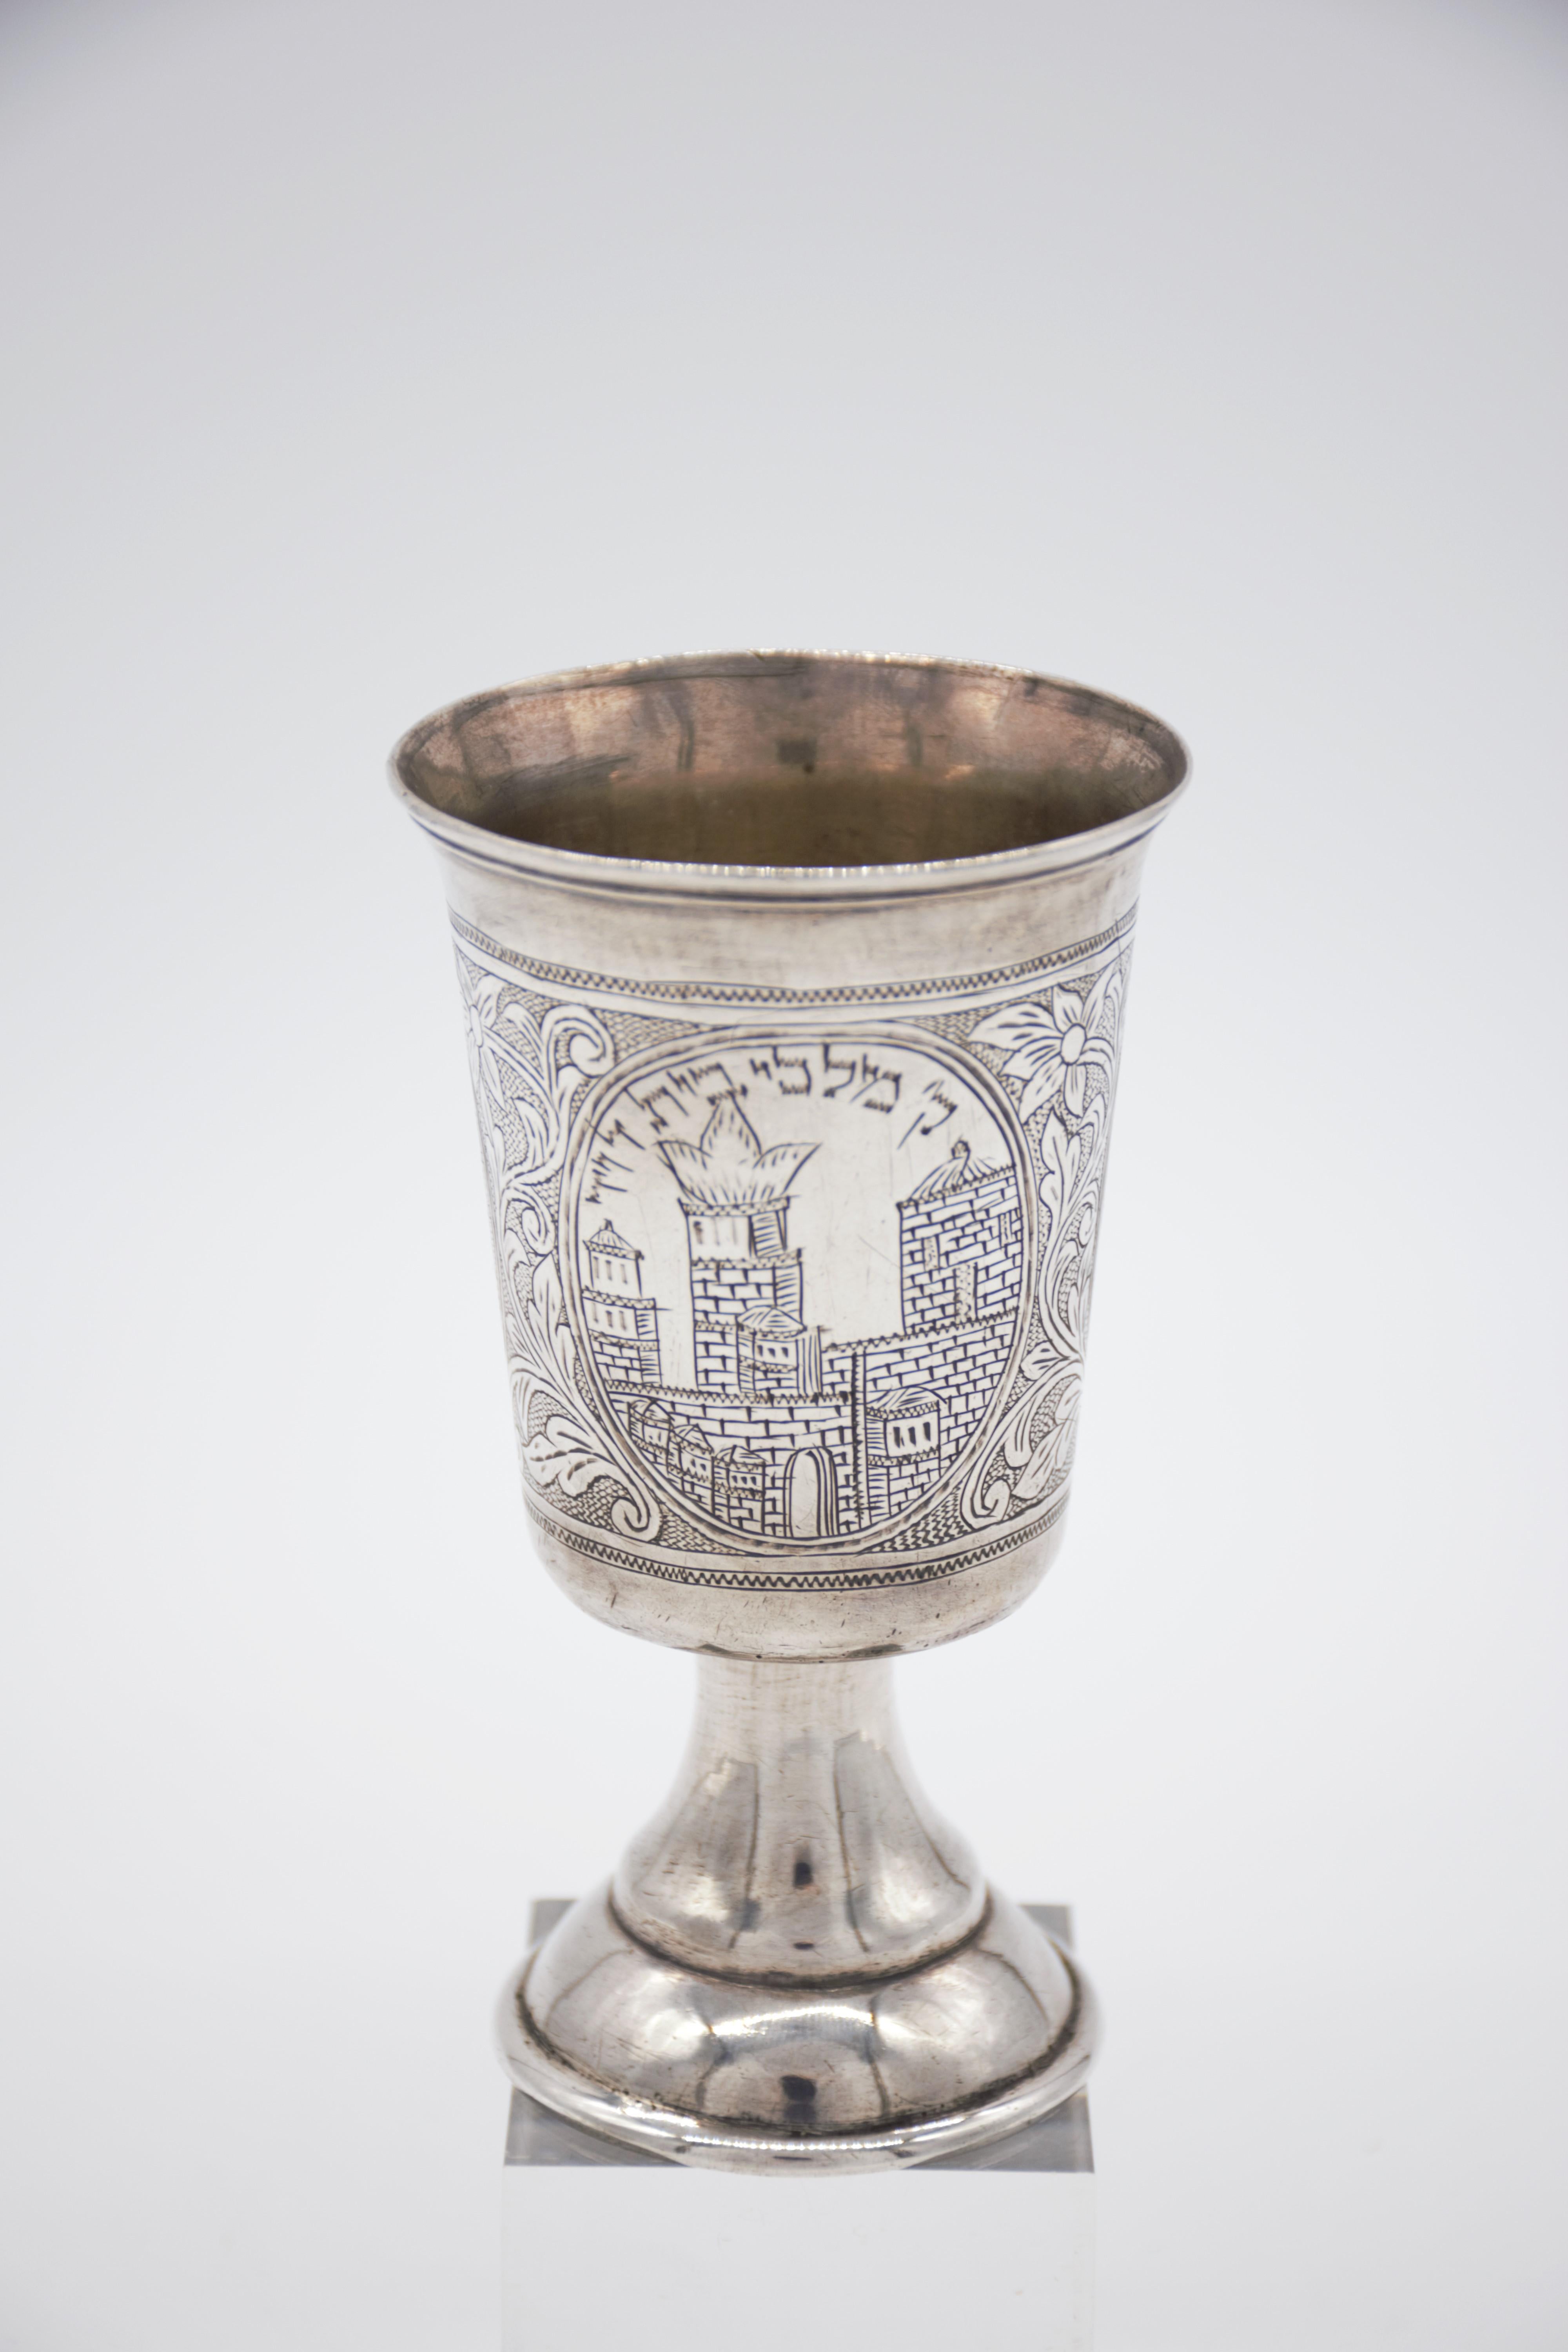 This 84 silver cup was made in Europe, in Poland or parts of Poland that are in modern Russia in the 19th century, the interesting and important in this cup types is that they were sent or brought over to Eretz Israel in the late 19th Century and